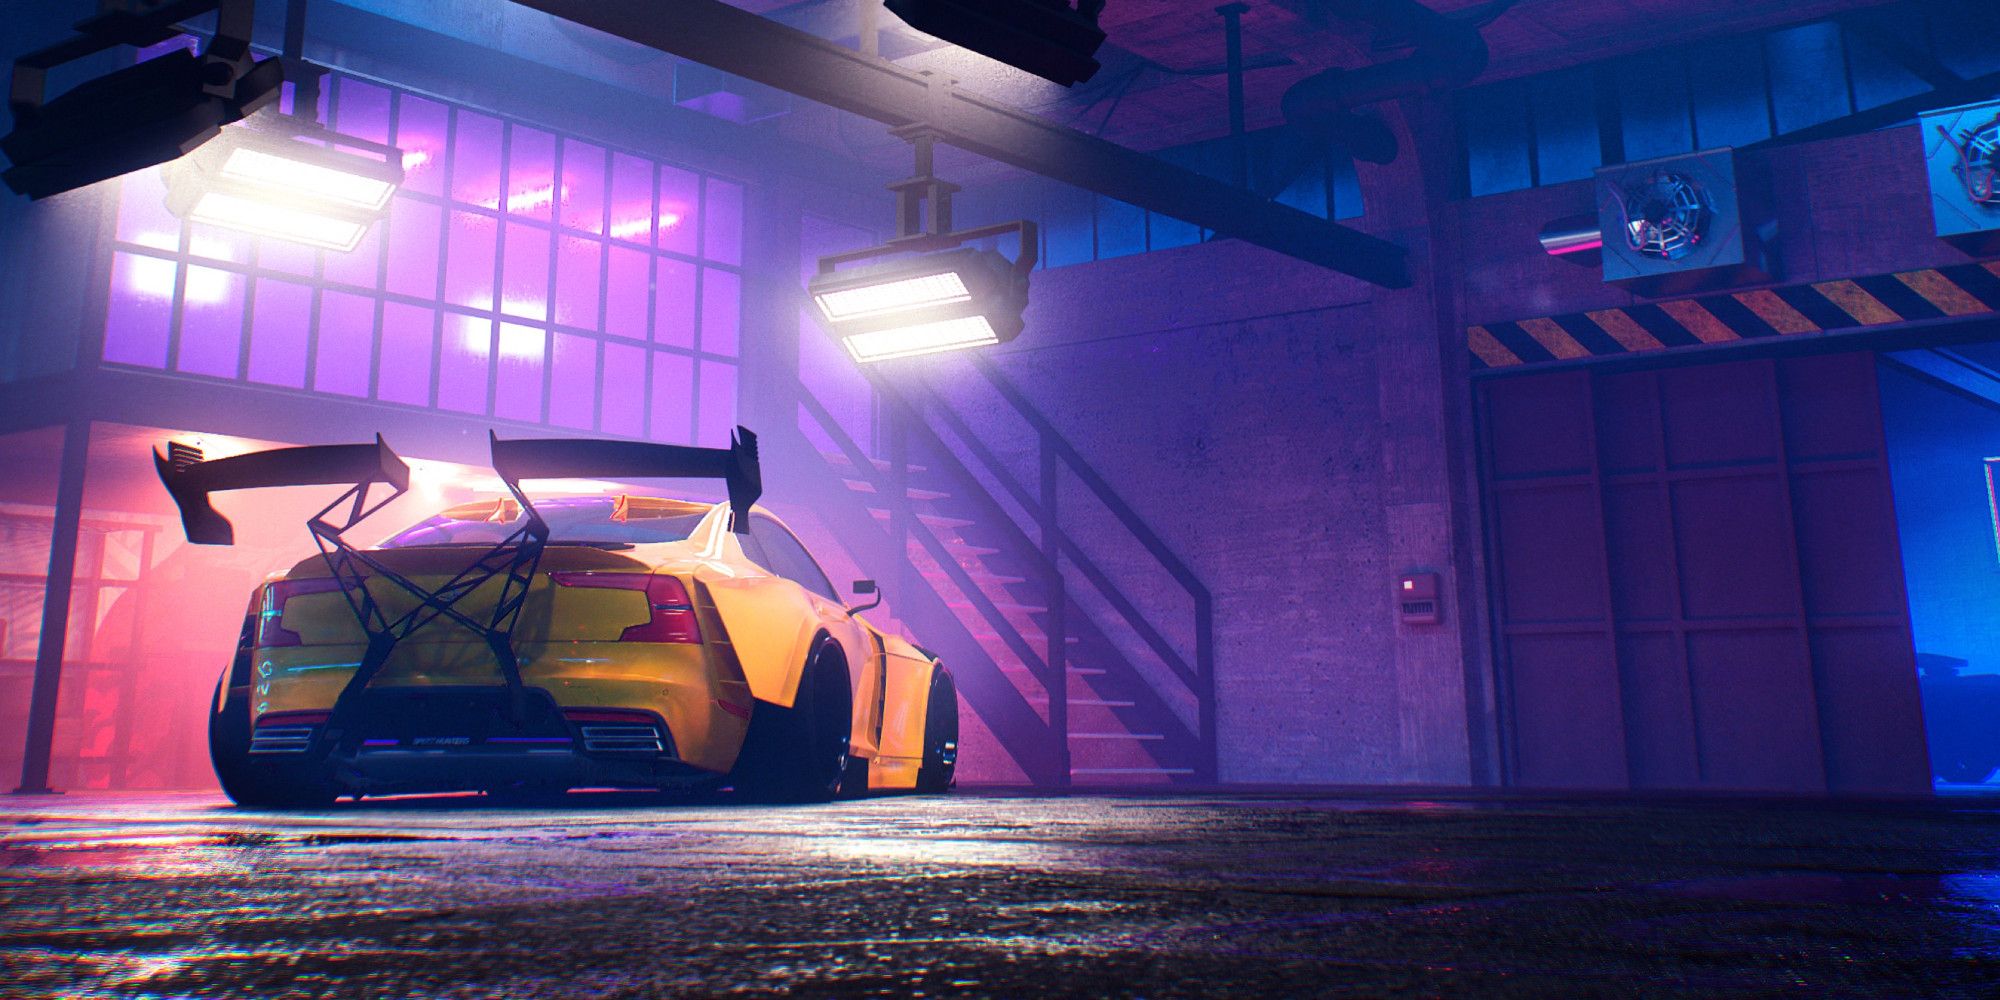 Need For Speed Mobile Gameplay Leaked Online: Here's How It Looks